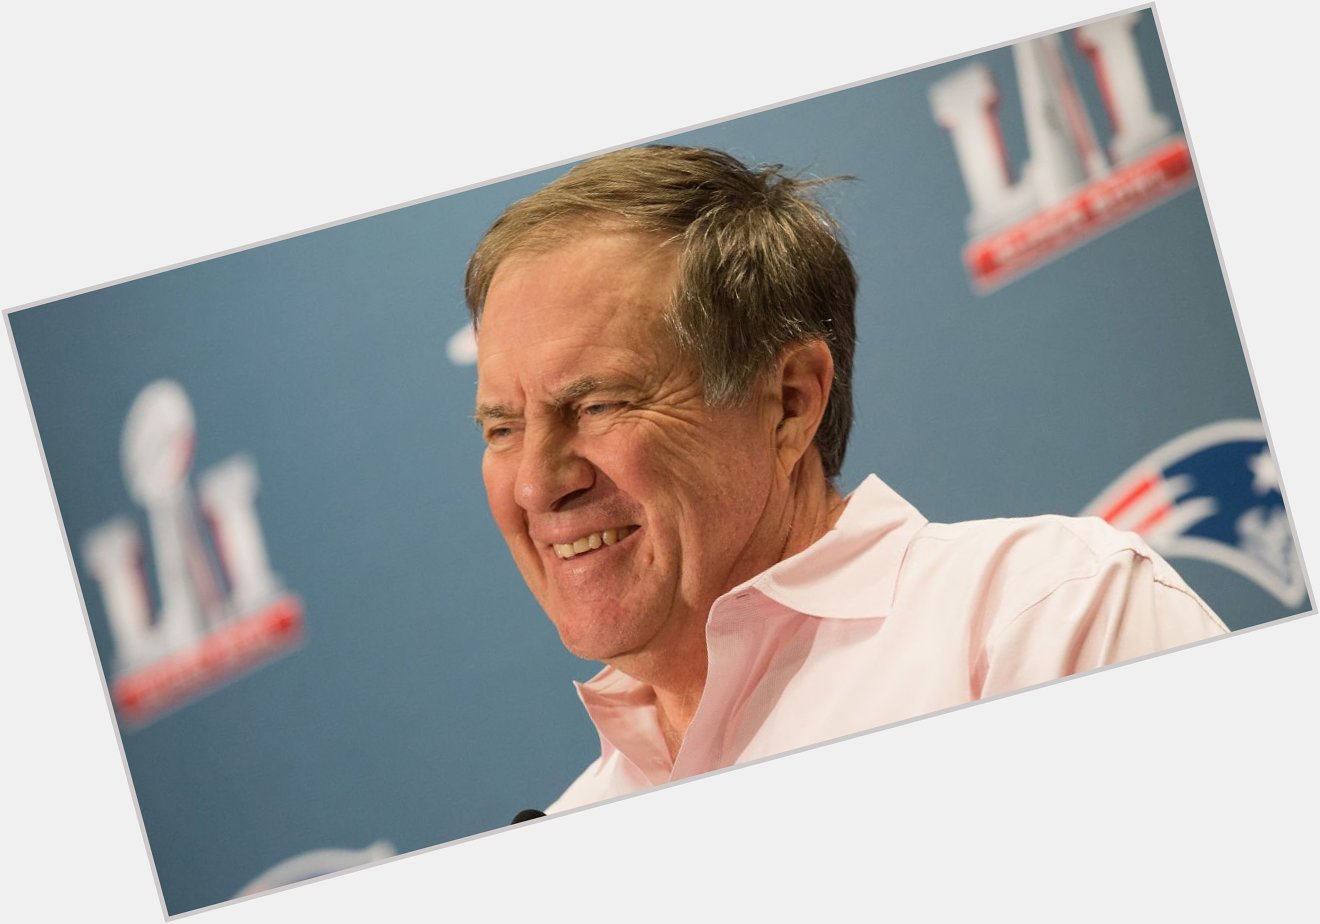 Happy 65th Birthday to the greatest coach in NFL history, Bill Belichick!  